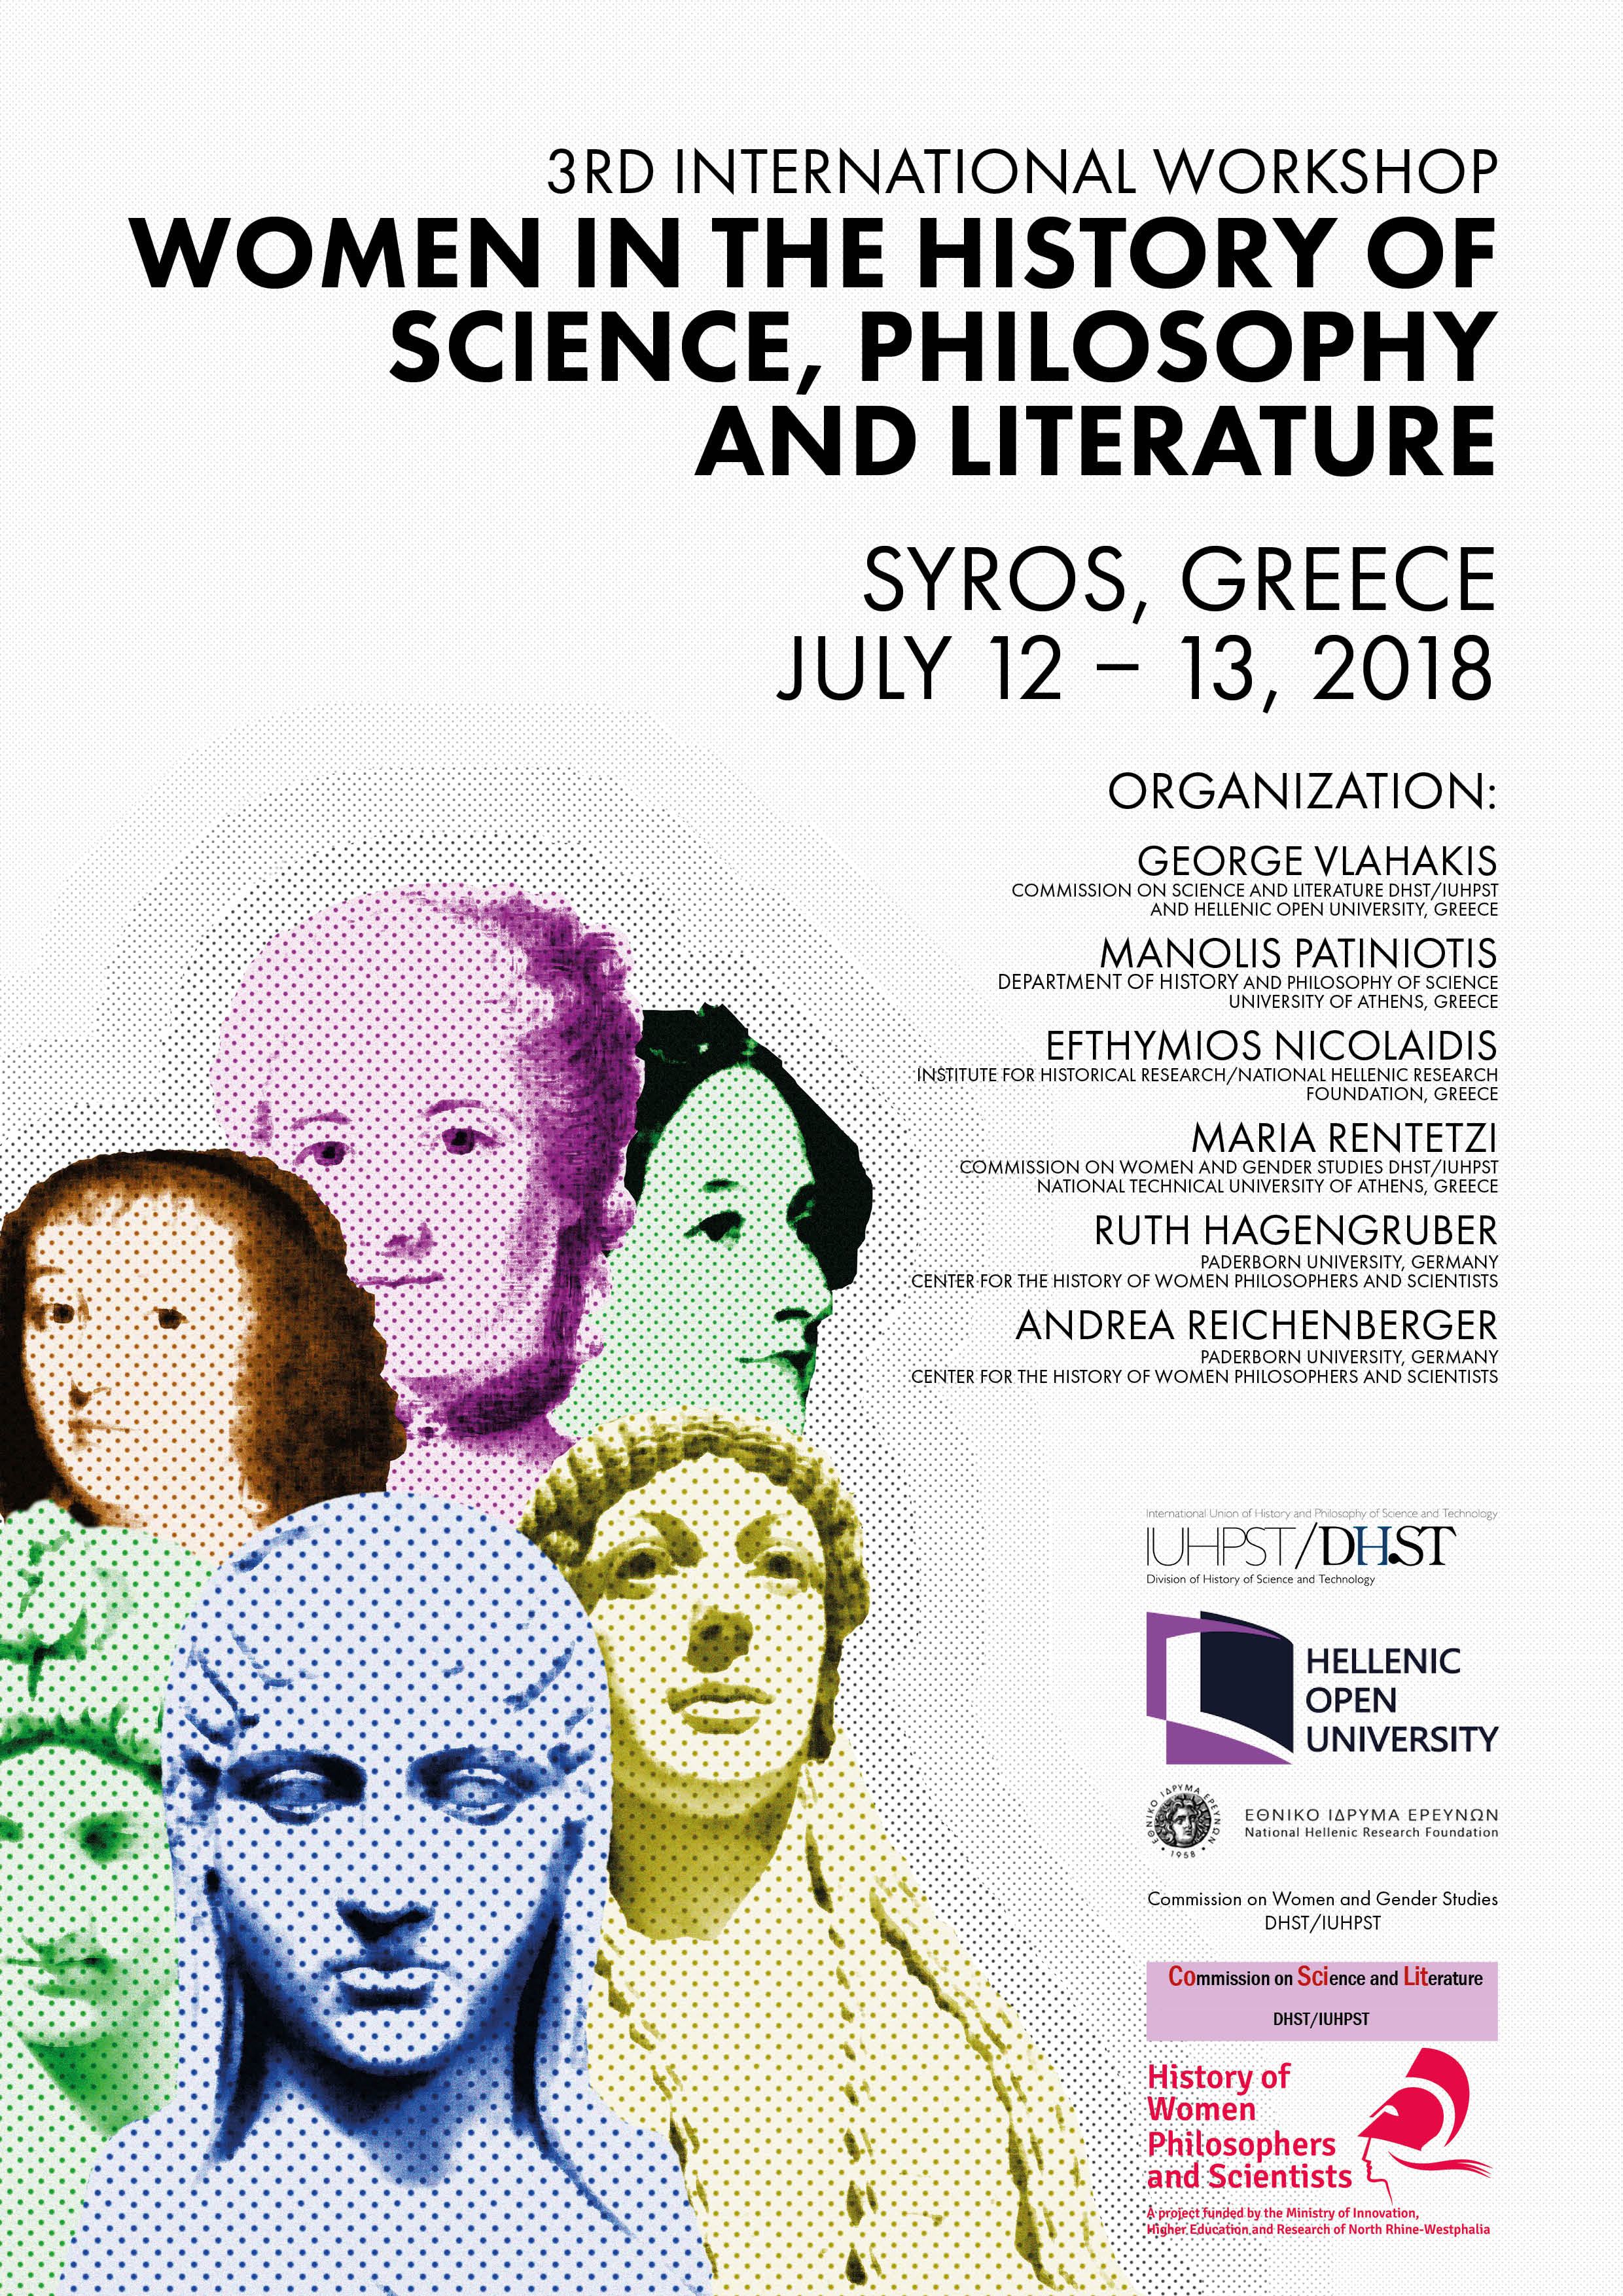 Women in the History of Science, Philosophy and Literature